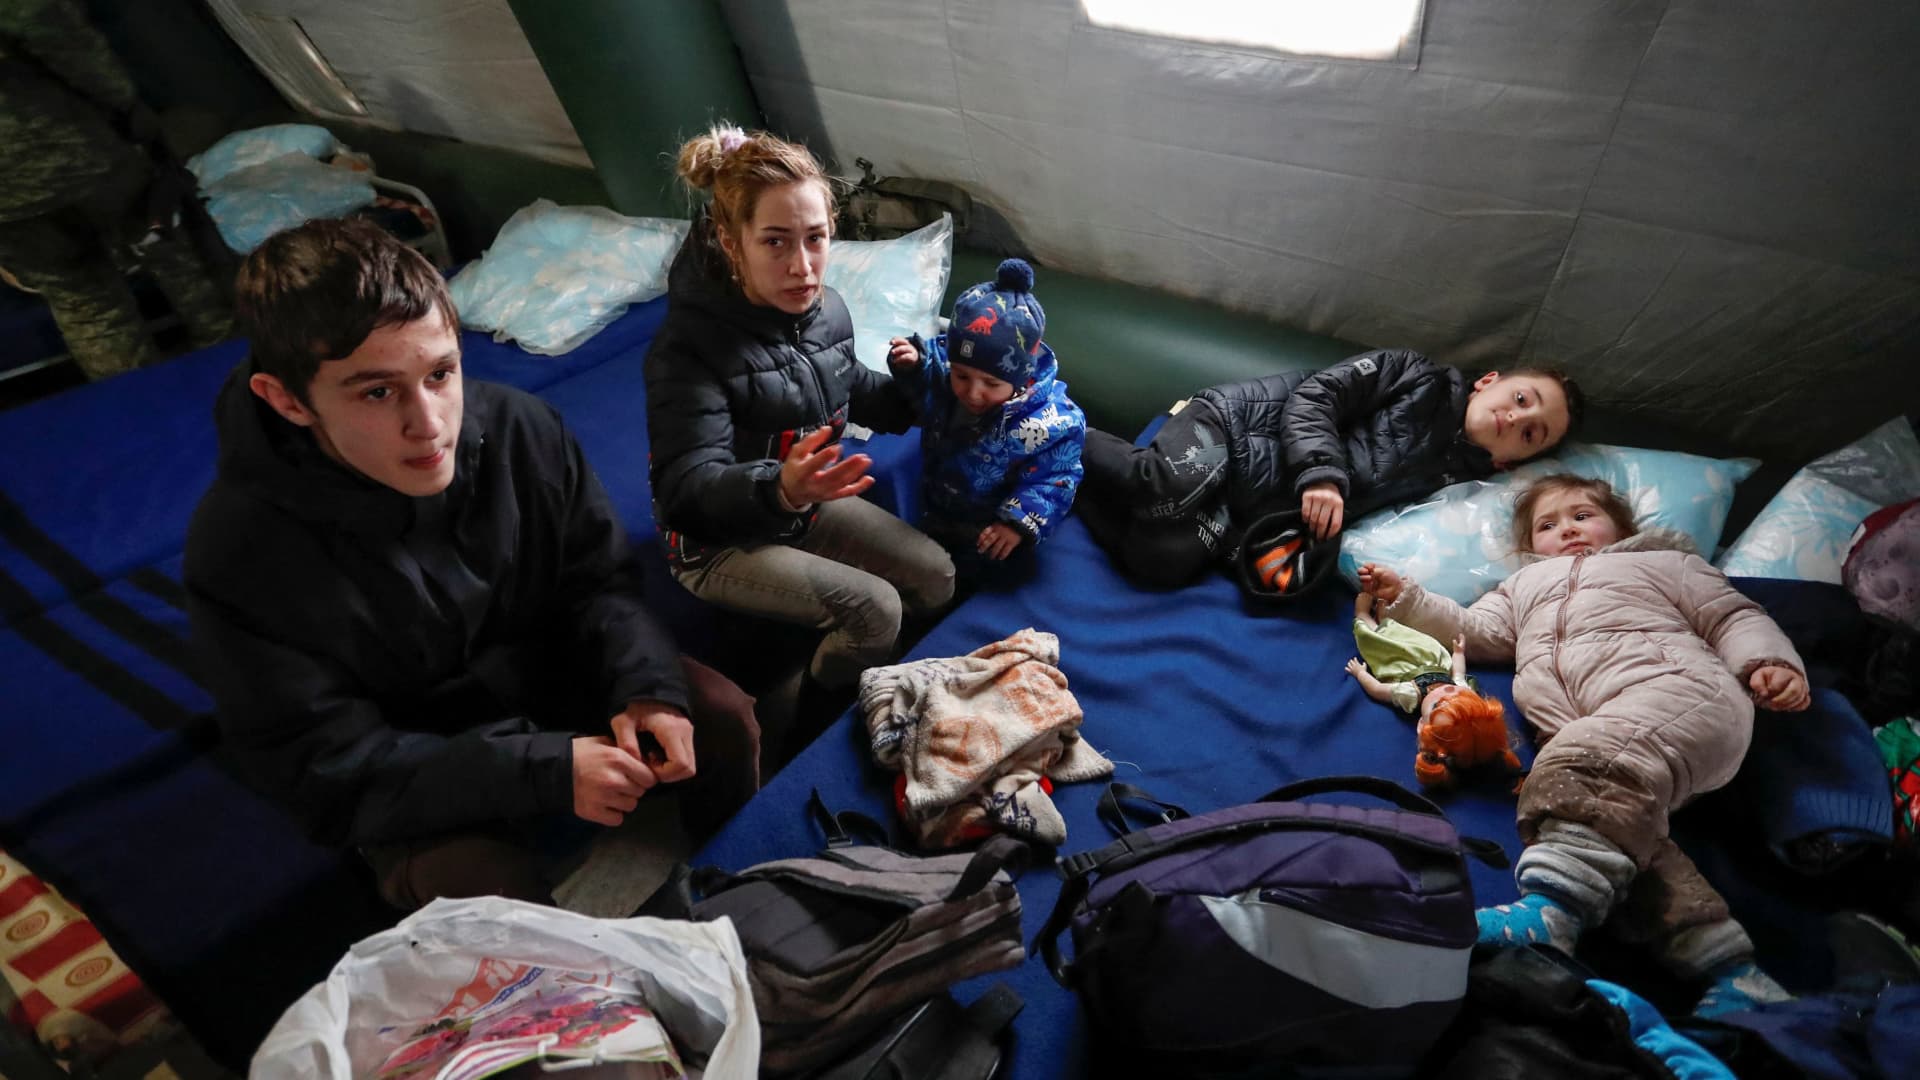 Evacuees from Mariupol area get settled at a refugee camp in the settlement of Bezymennoye during Ukraine-Russia conflict in the Donetsk region, Ukraine March 8, 2022.